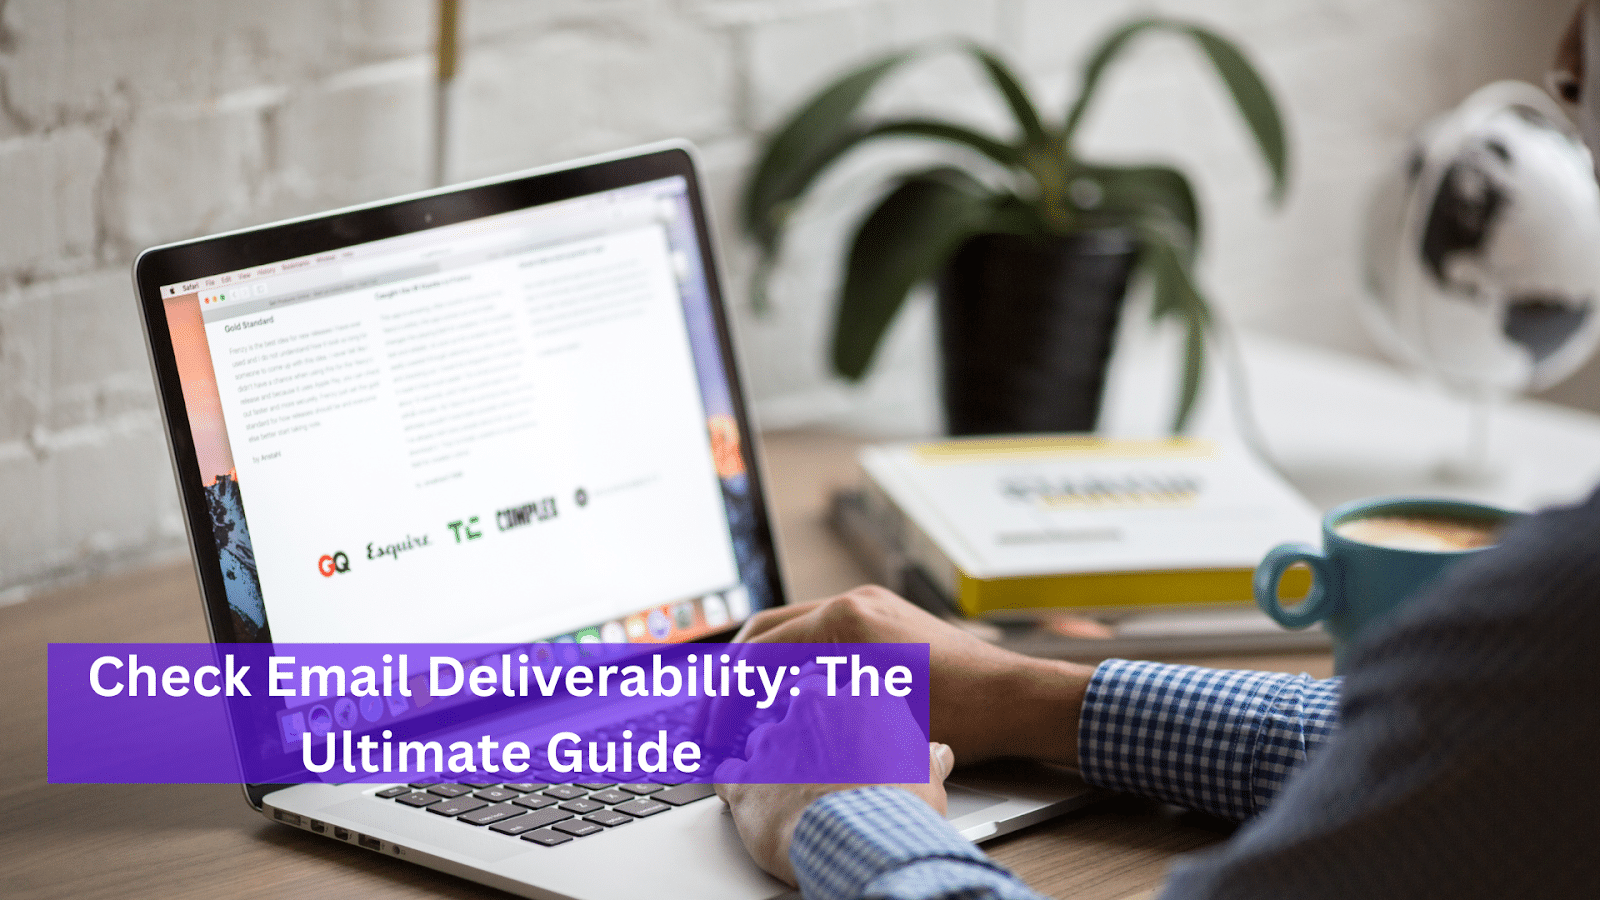 Check Email Deliverability